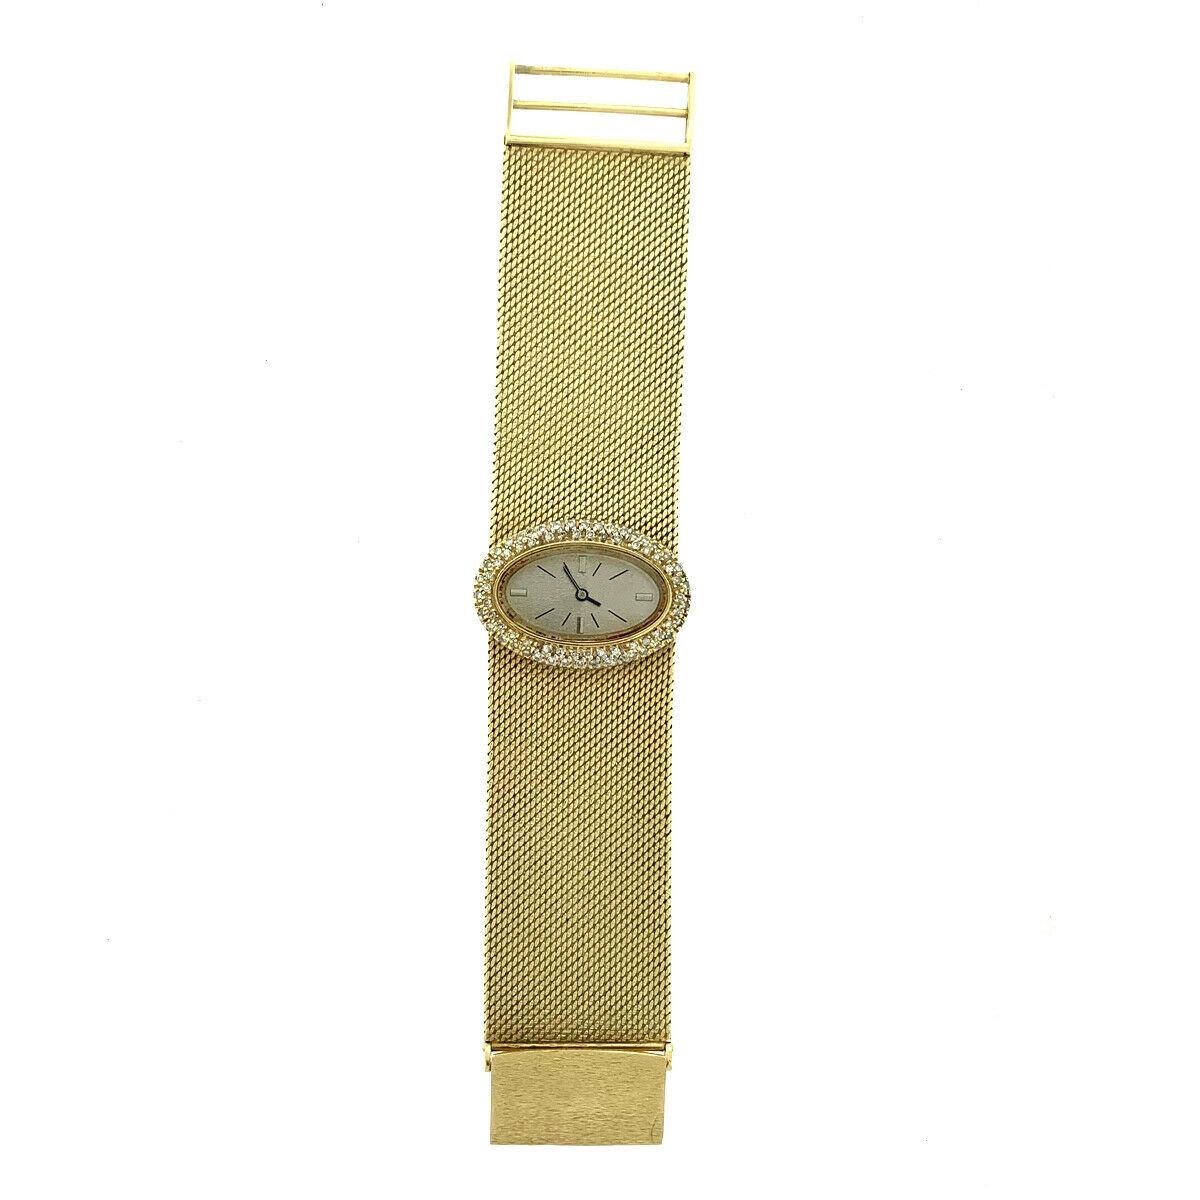 Brand - Unbranded

Case - 33mm 14k Yellow Gold

Dial - Champagne with Stick Indexes

Bezel - Diamonds

Bracelet - 14k Yellow Gold, Fits 6